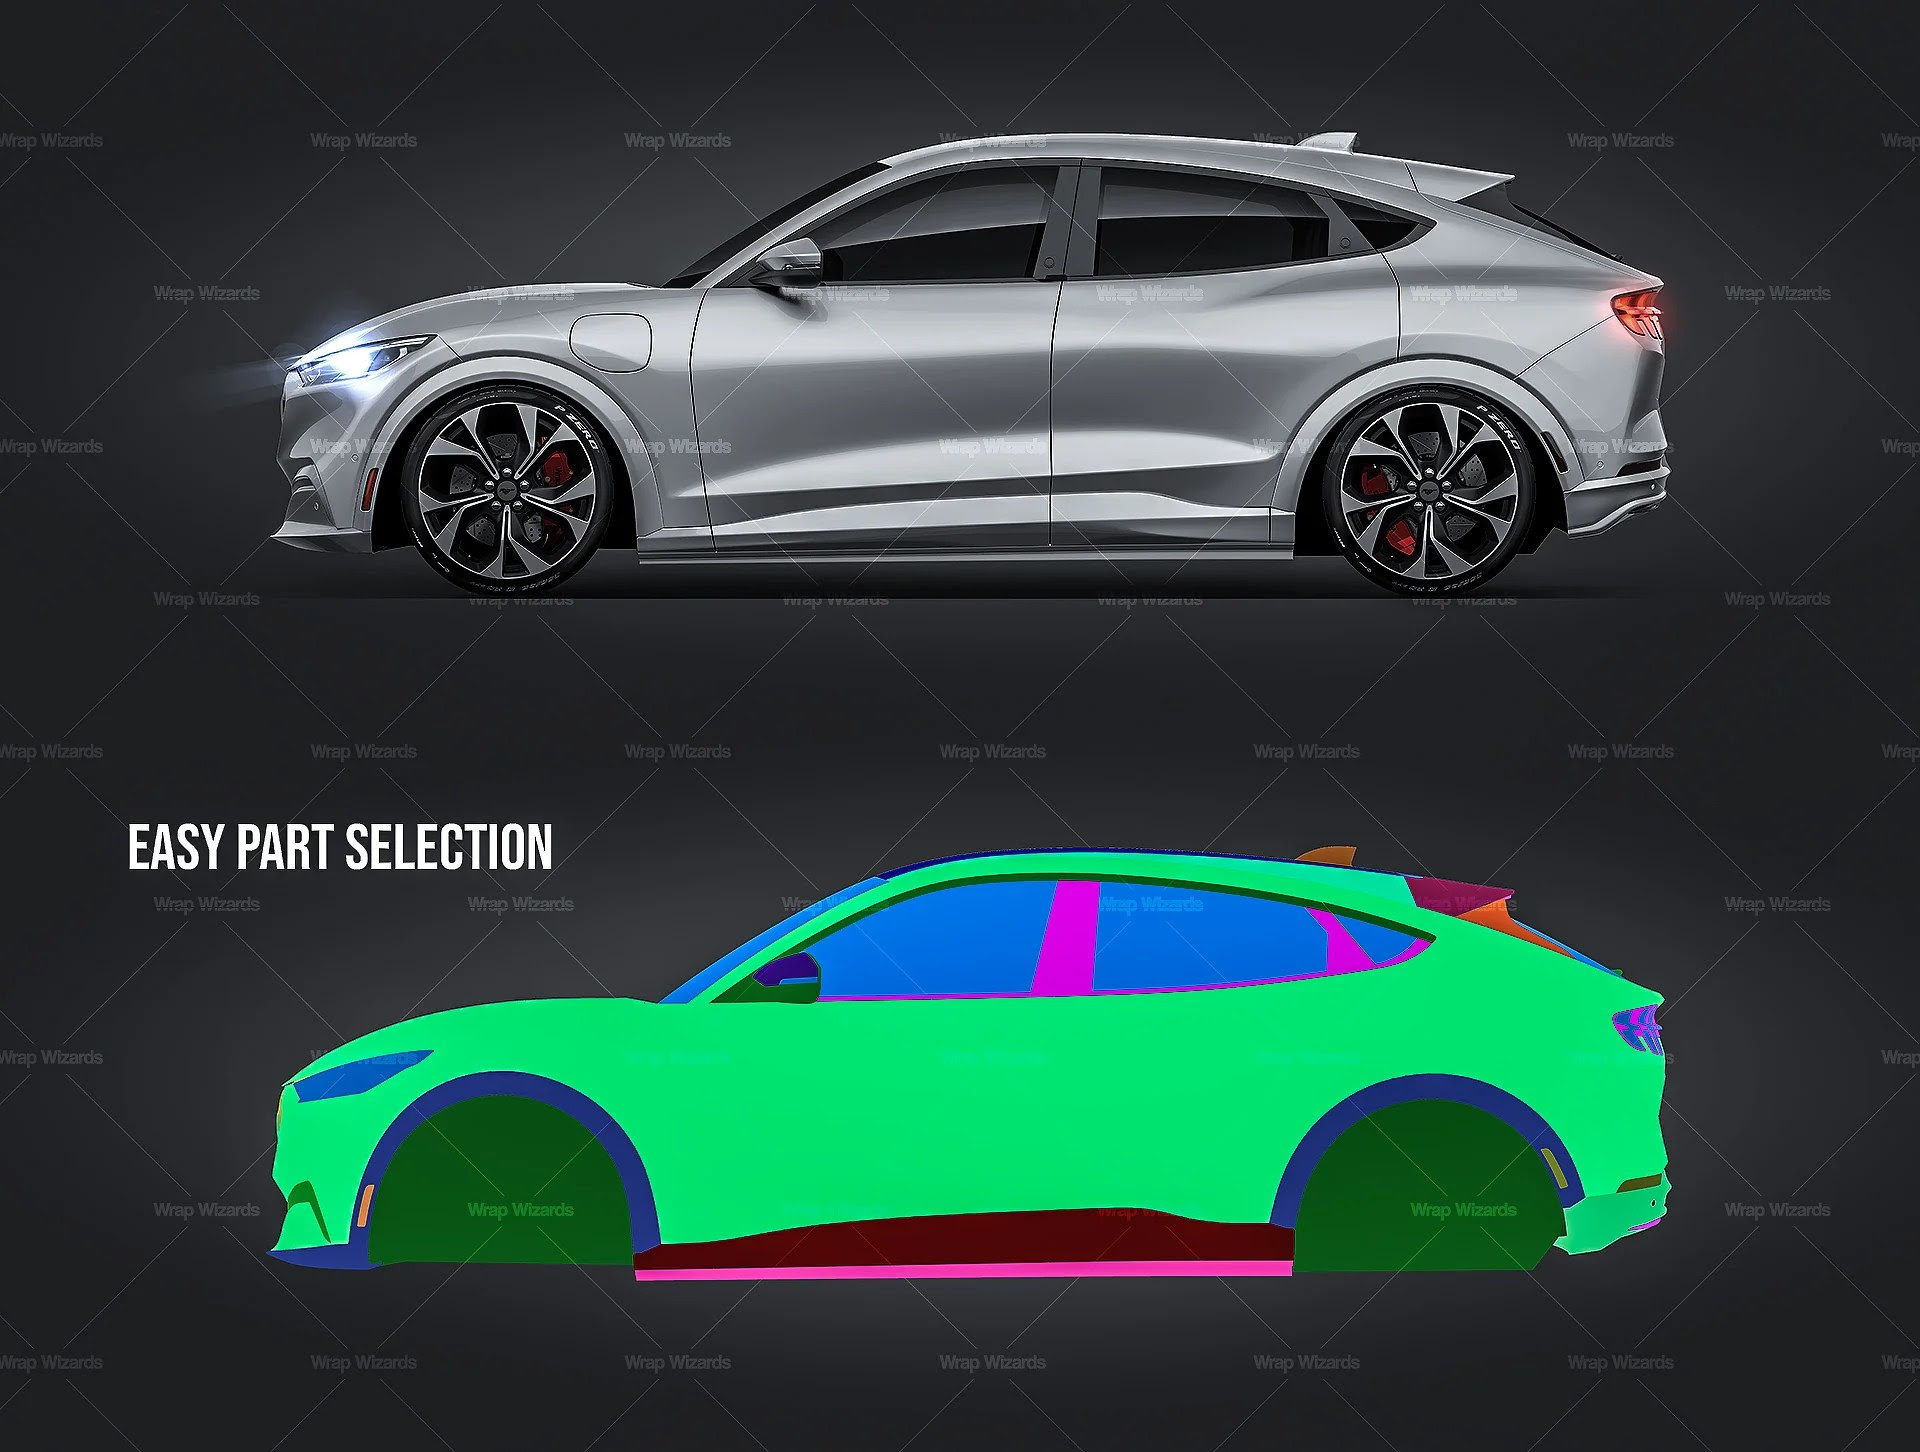 Ford Mustang MachE 2021 glossy finish all sides Car Mockup Template